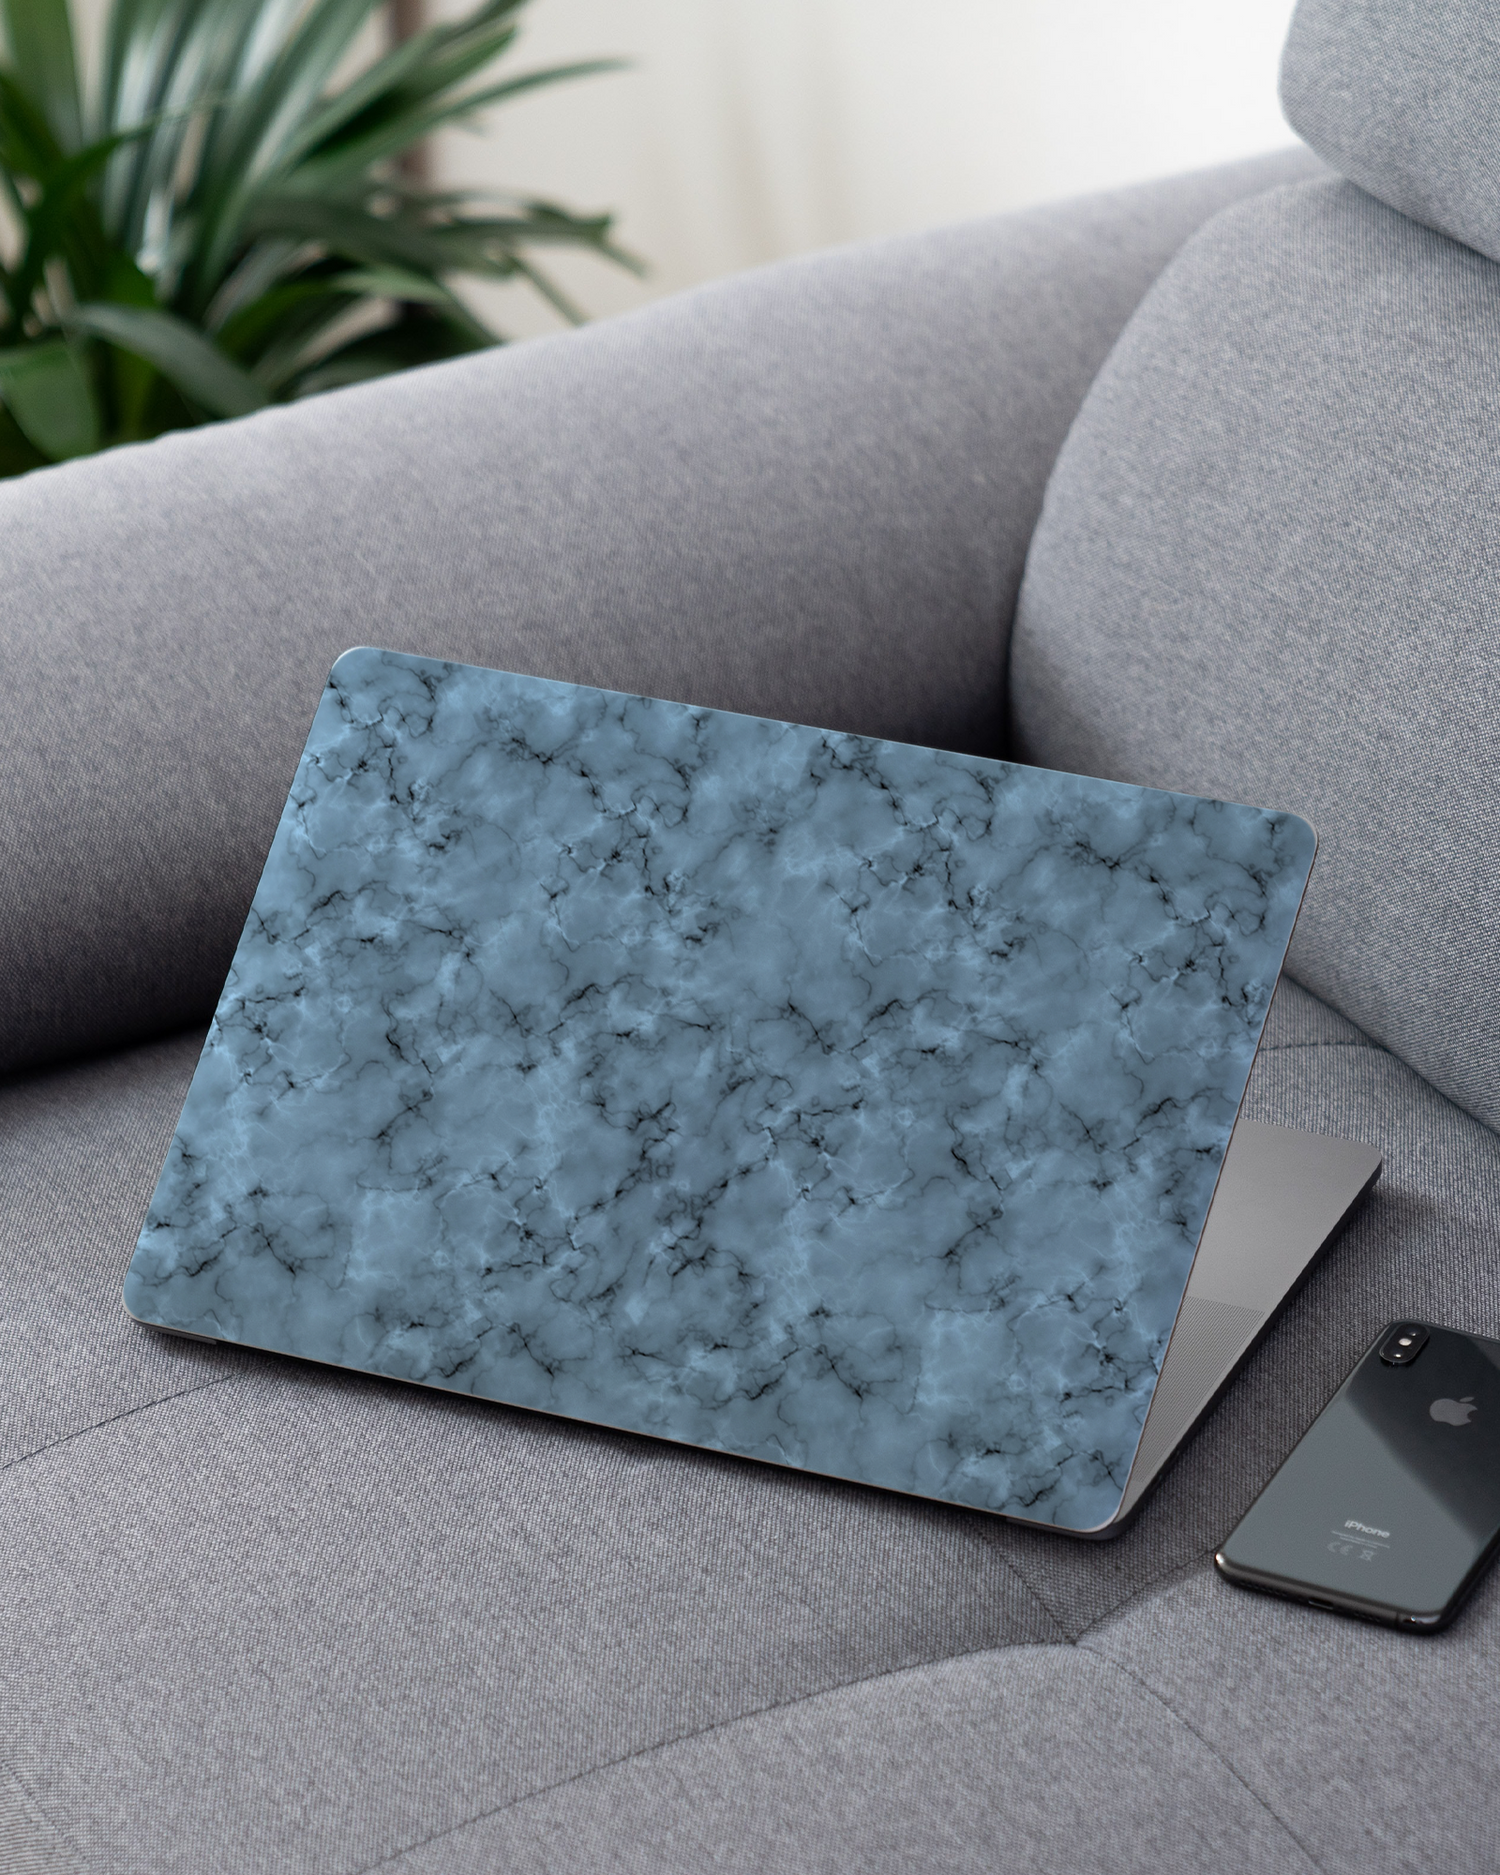 Blue Marble Laptop Skin for 13 inch Apple MacBooks on a couch